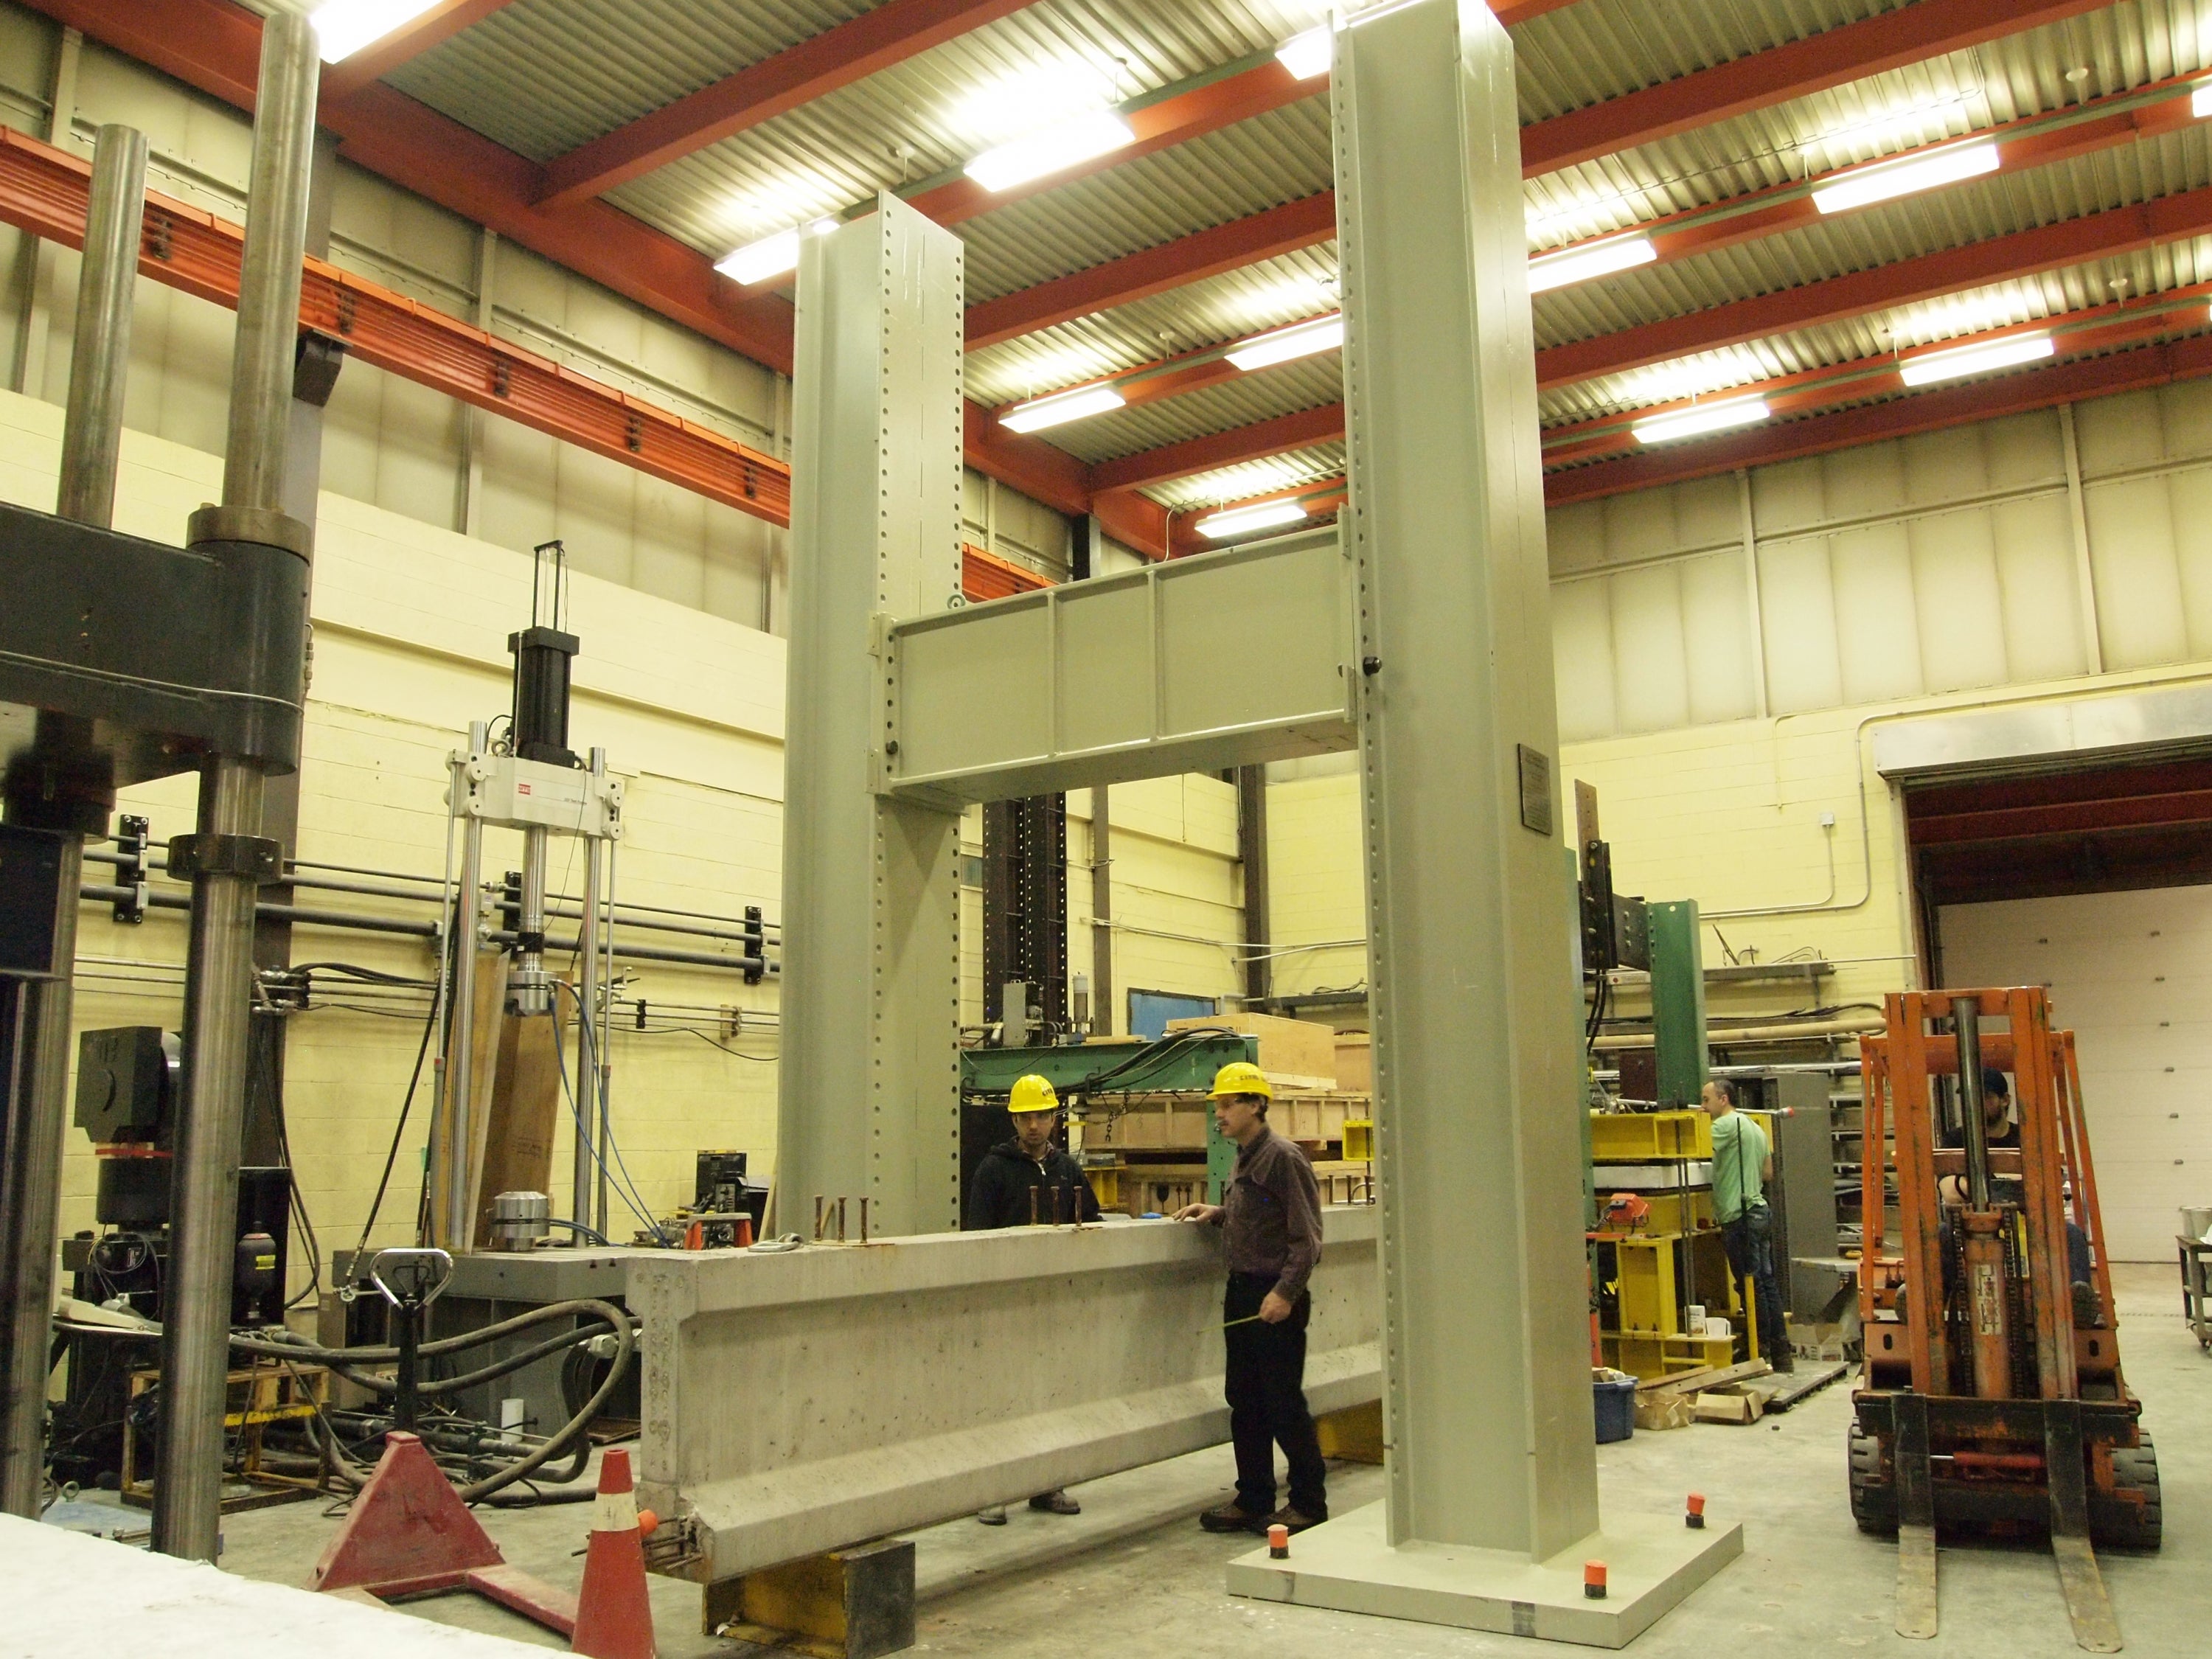 Testing a load bearing beam in the Structures Lab